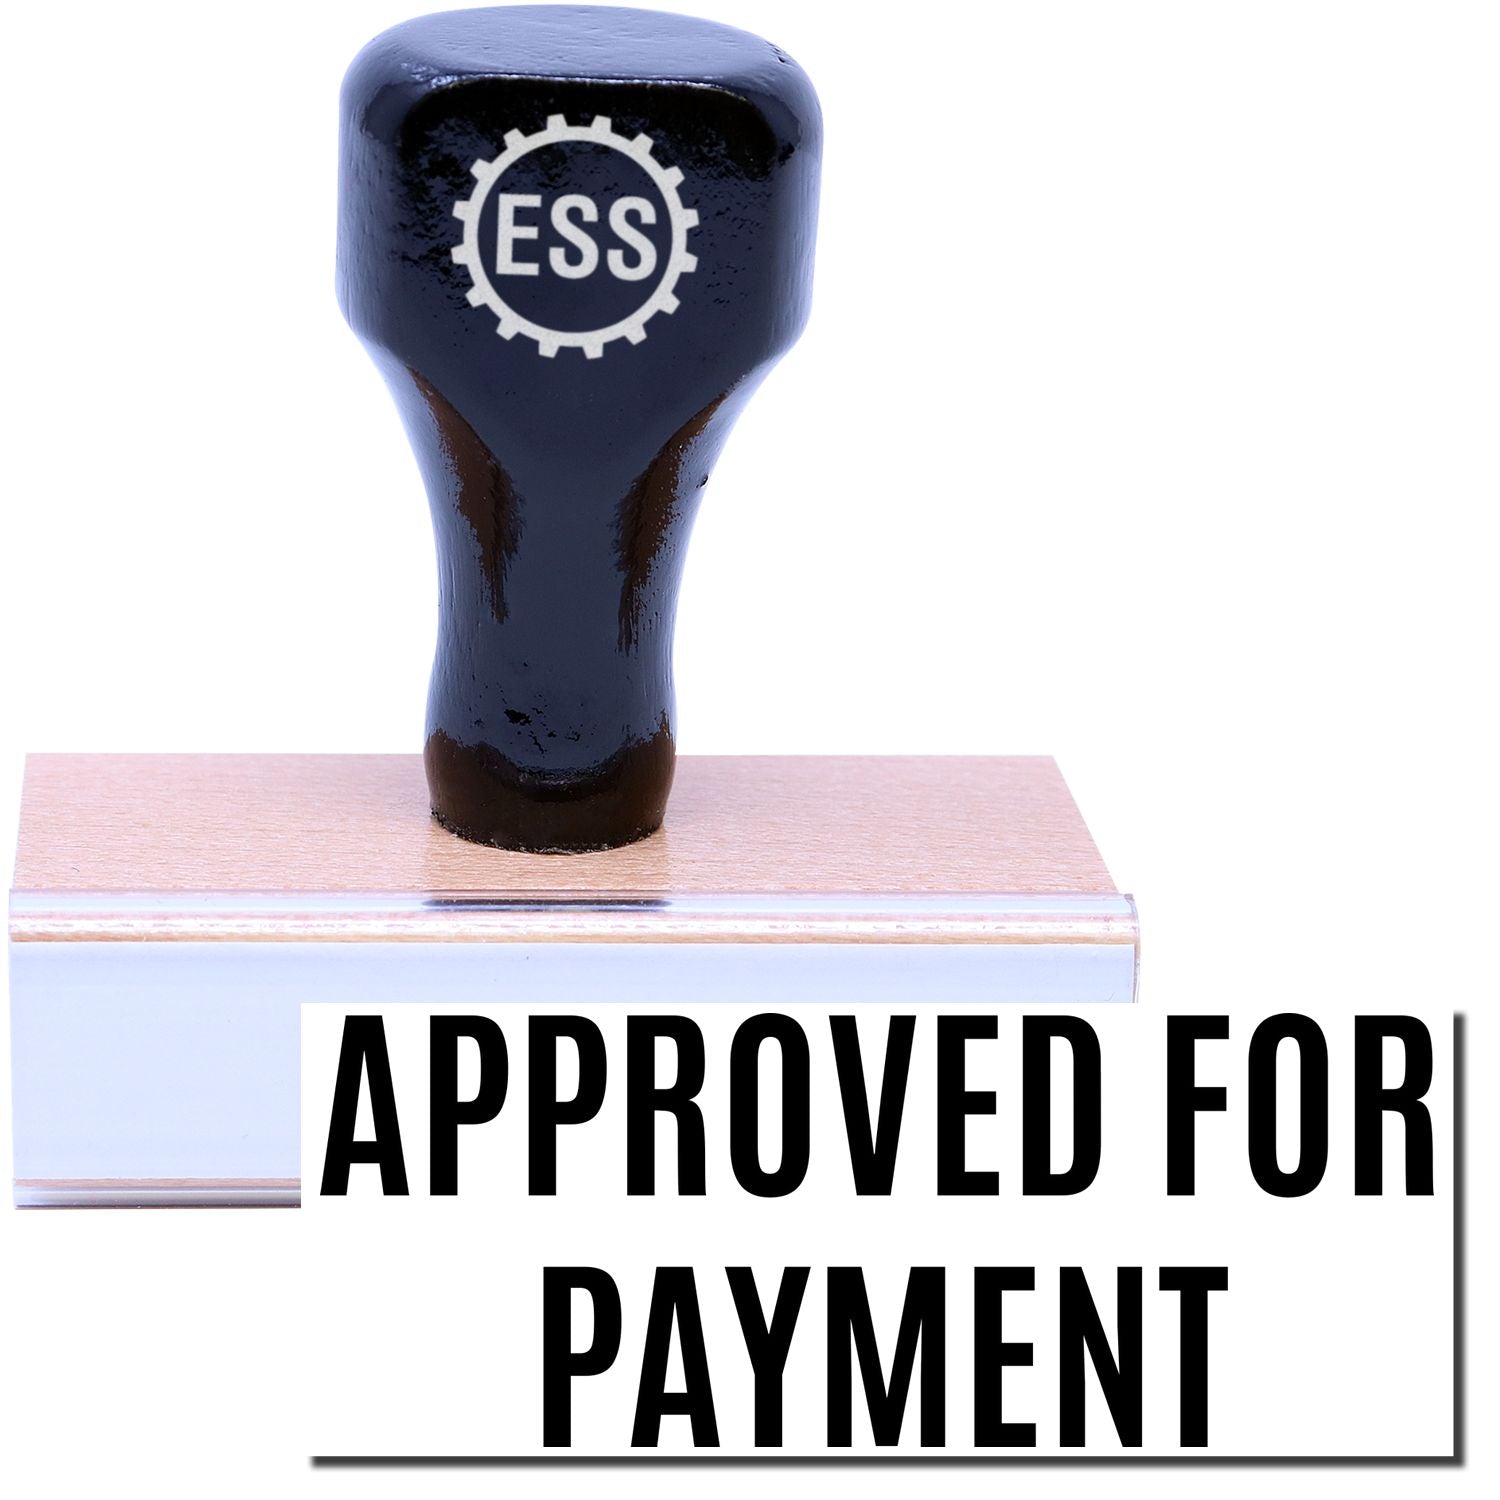 A stock office rubber stamp with a stamped image showing how the text "APPROVED FOR PAYMENT" in a narrow font is displayed after stamping.